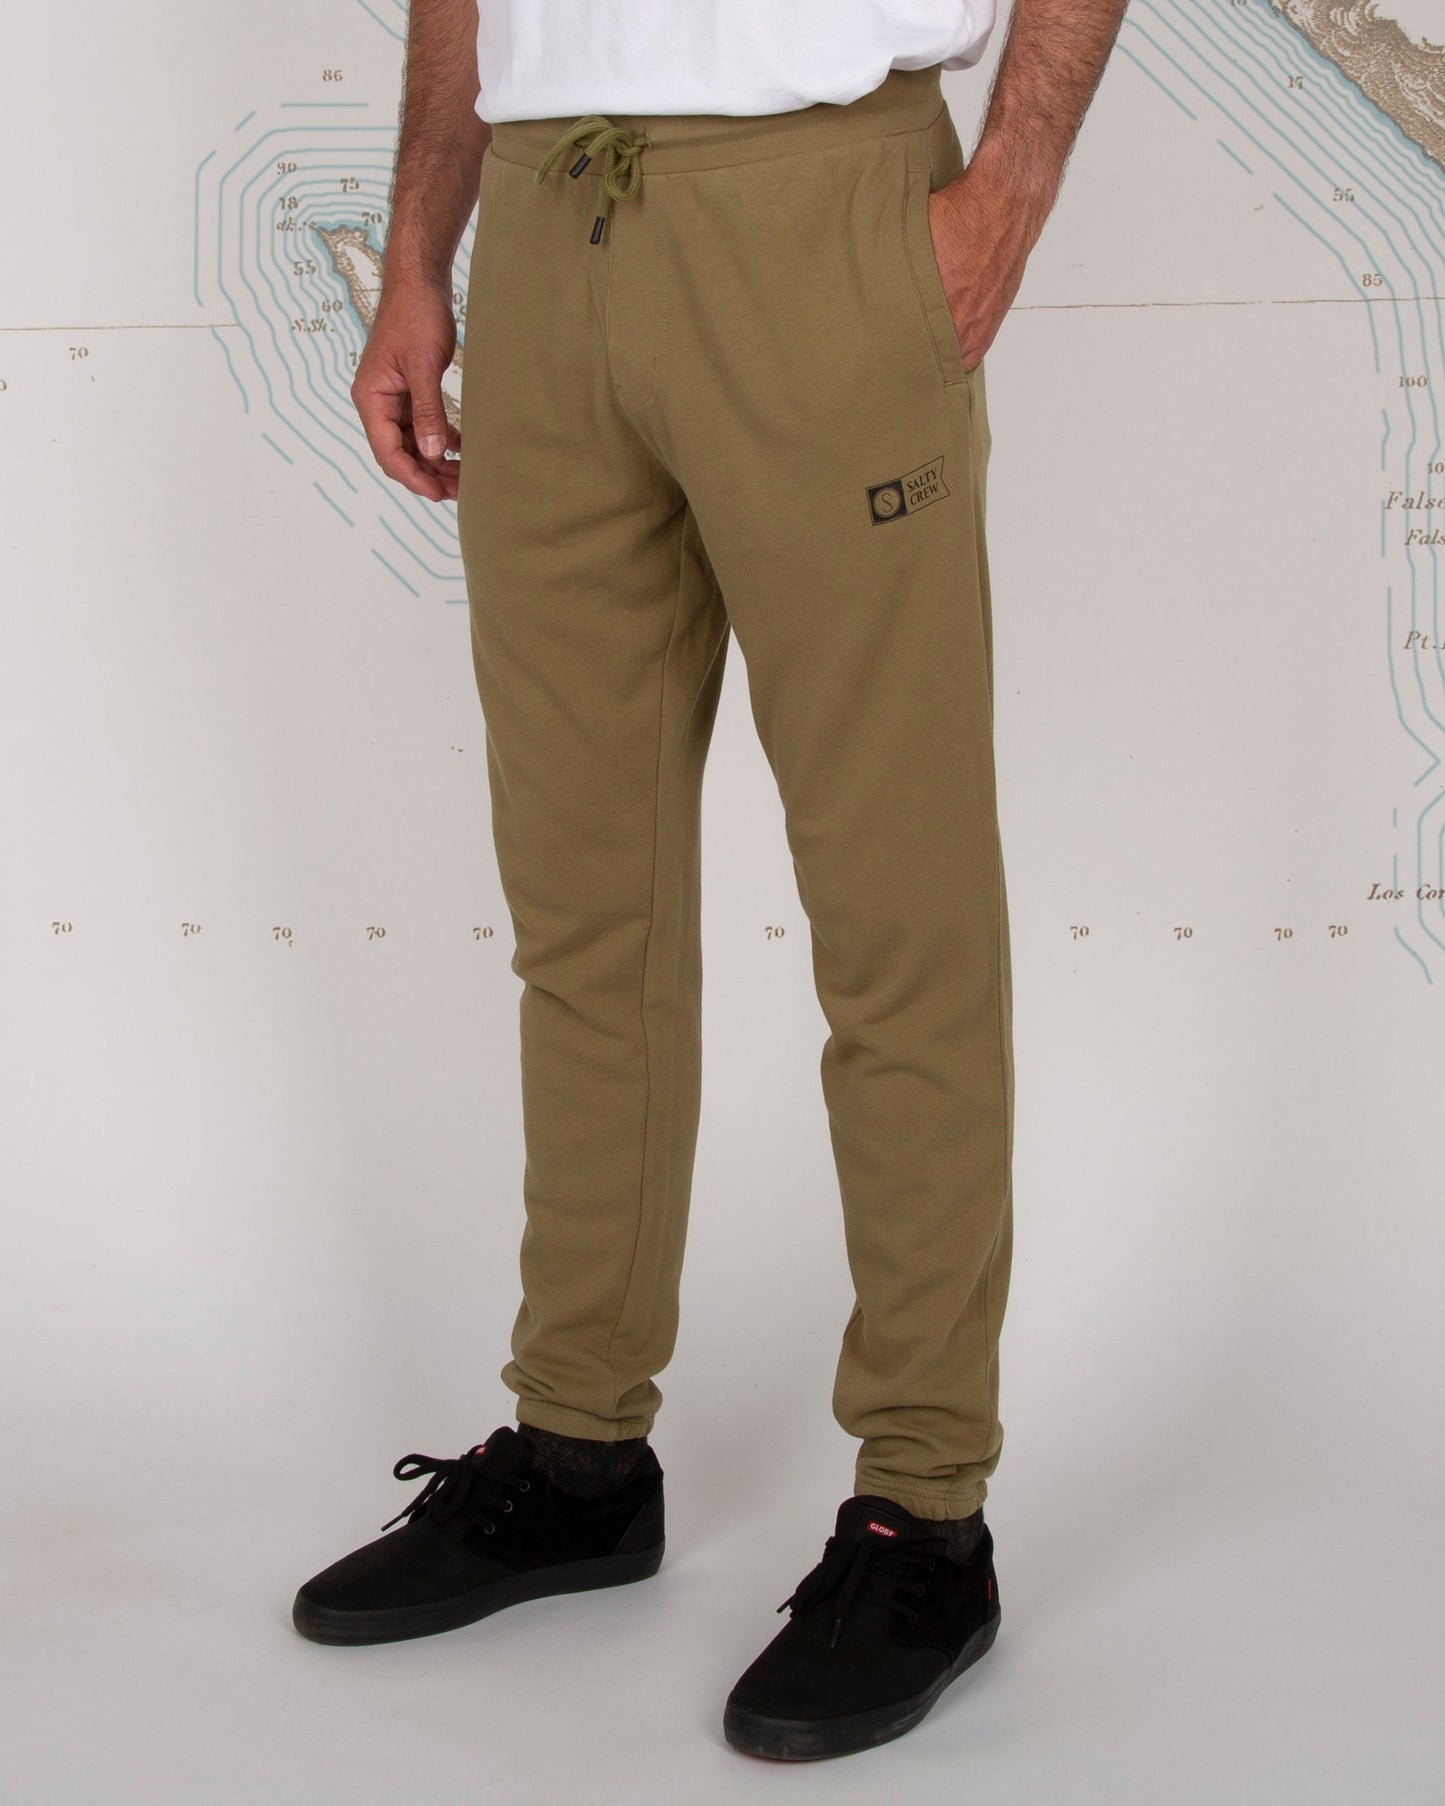 RESIN PIGMENT SWEATPANT - Dusty Olive